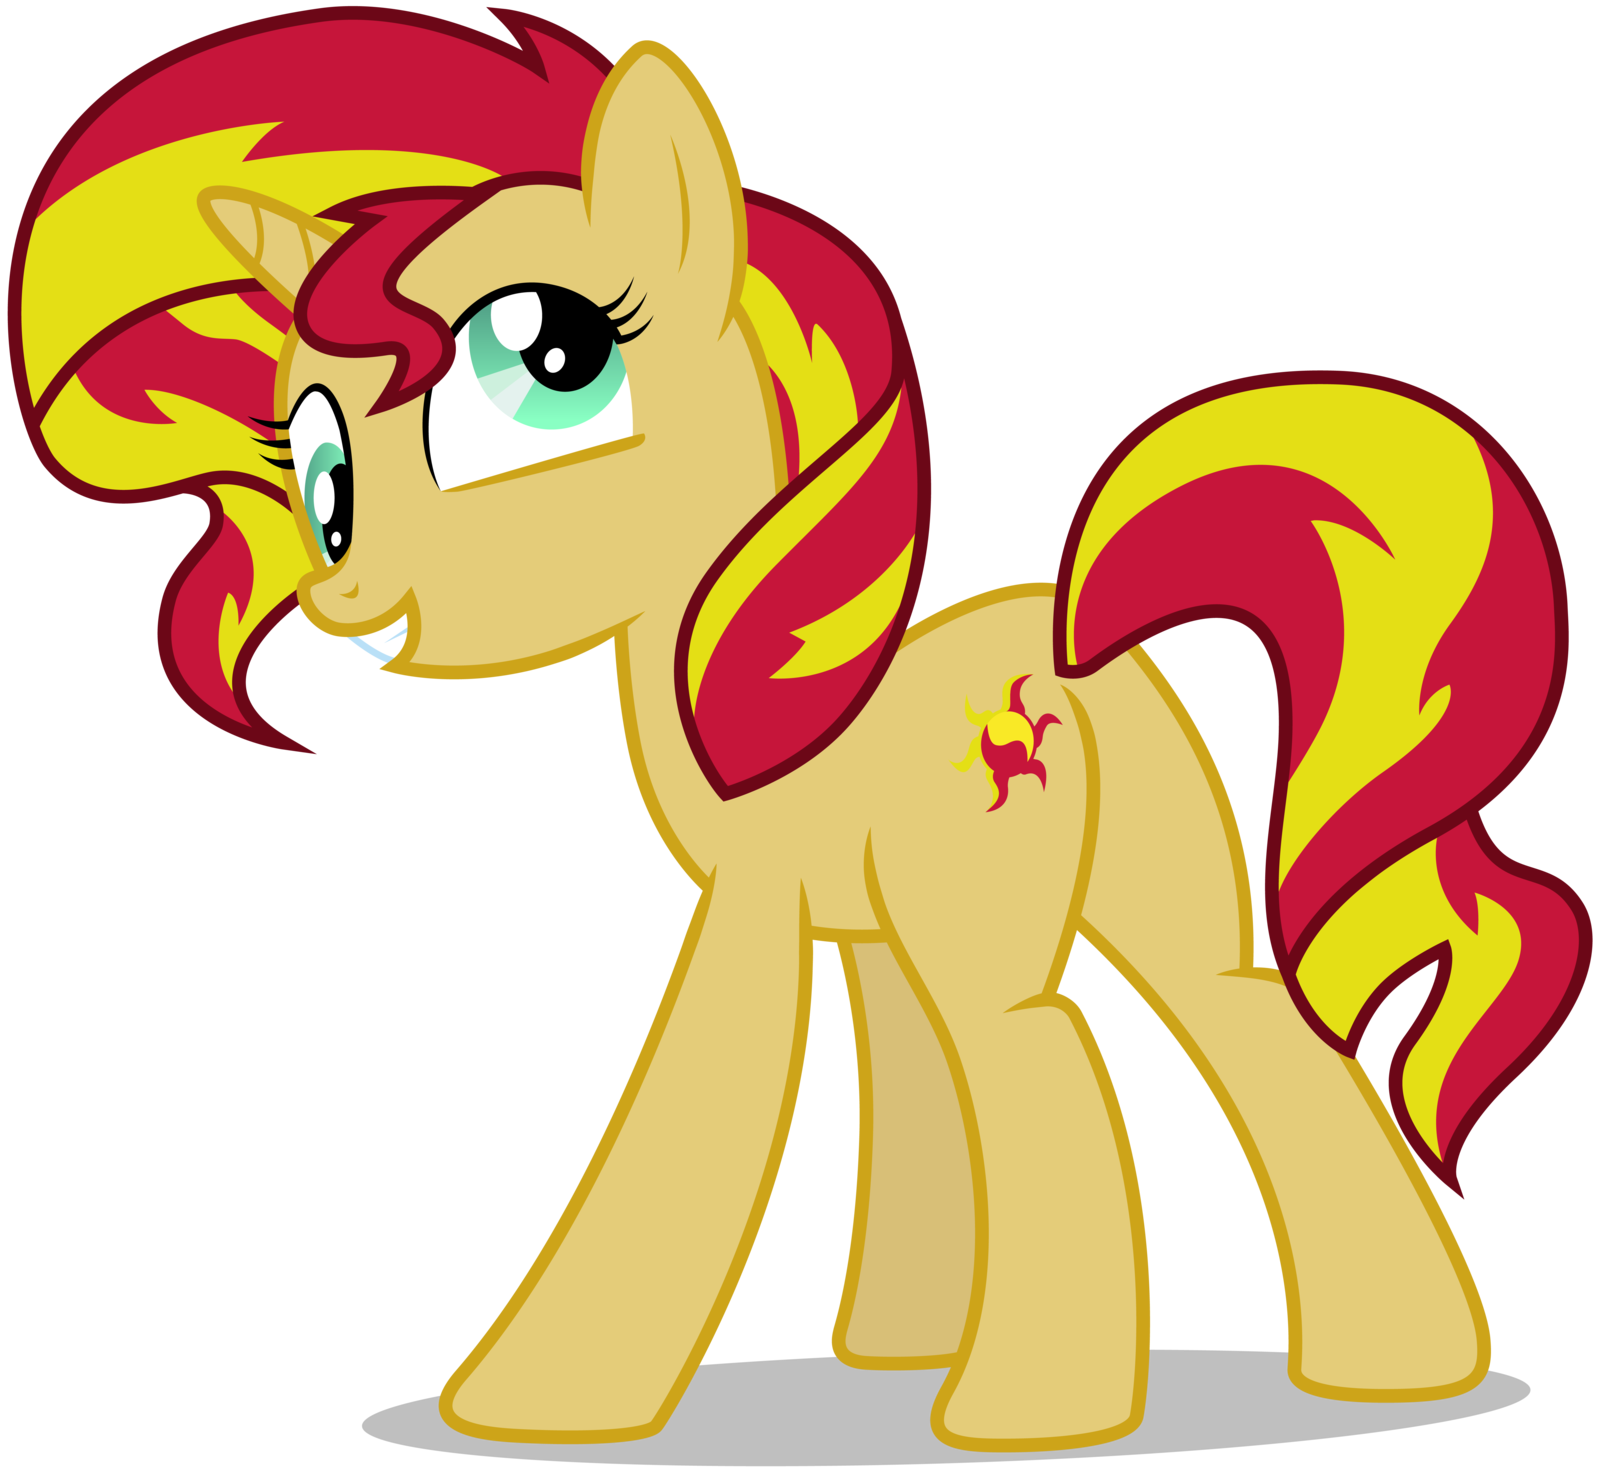 sunset_shimmer___derp_by_caliazian-d6au3